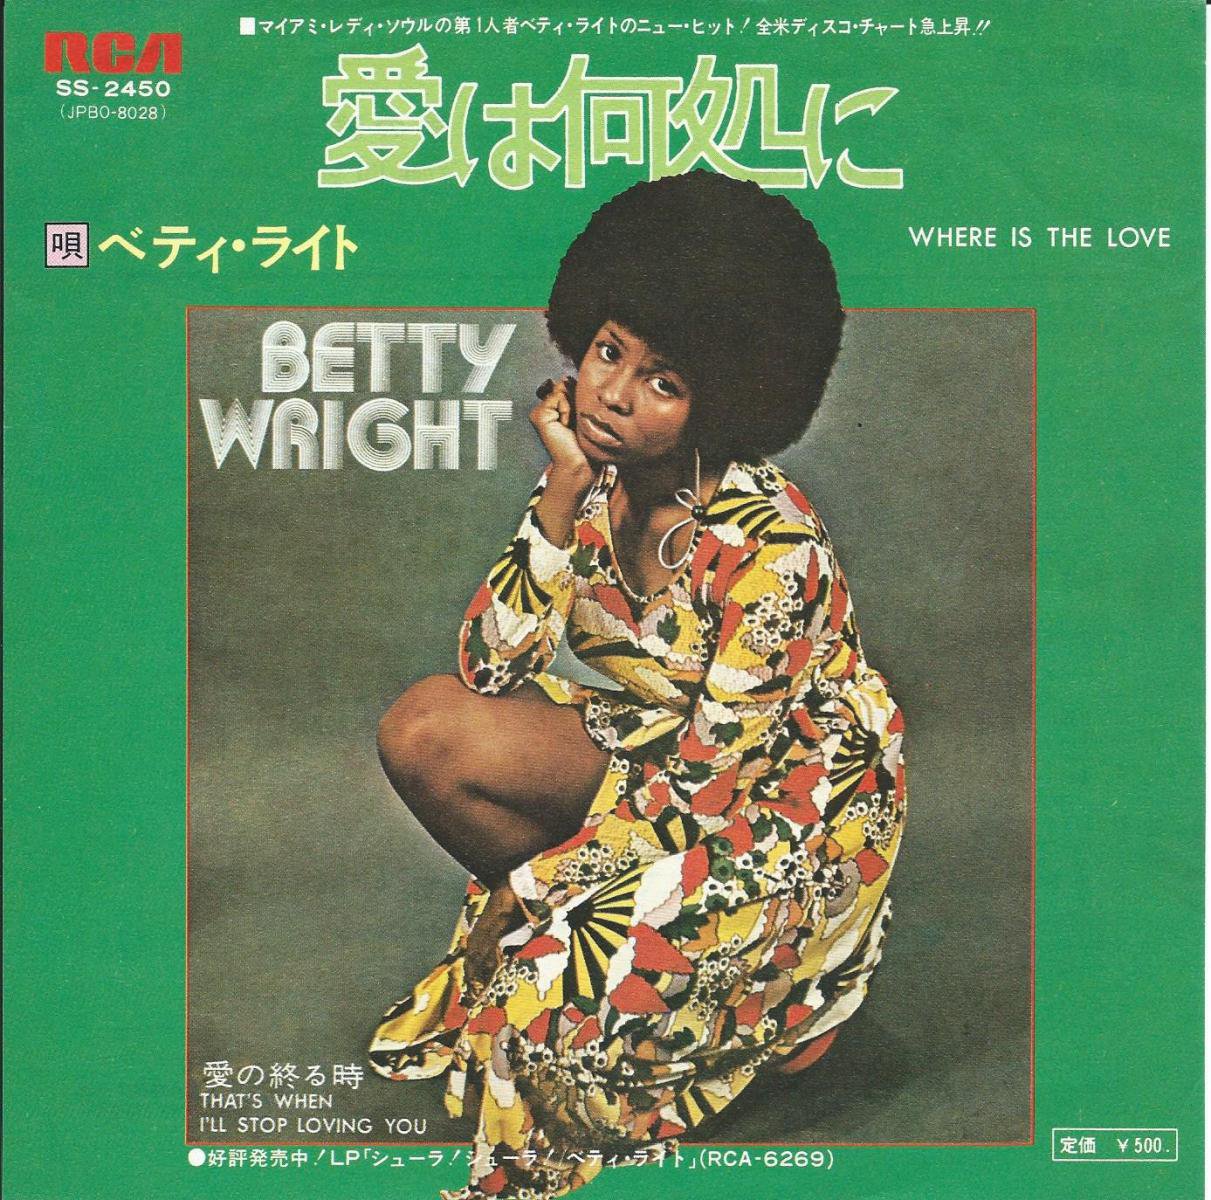 ٥ƥ饤 BETTY WRIGHT / ϲ WHERE IS THE LOVE / ν THAT'S WHEN I'LL STOP LOVING YOU (7